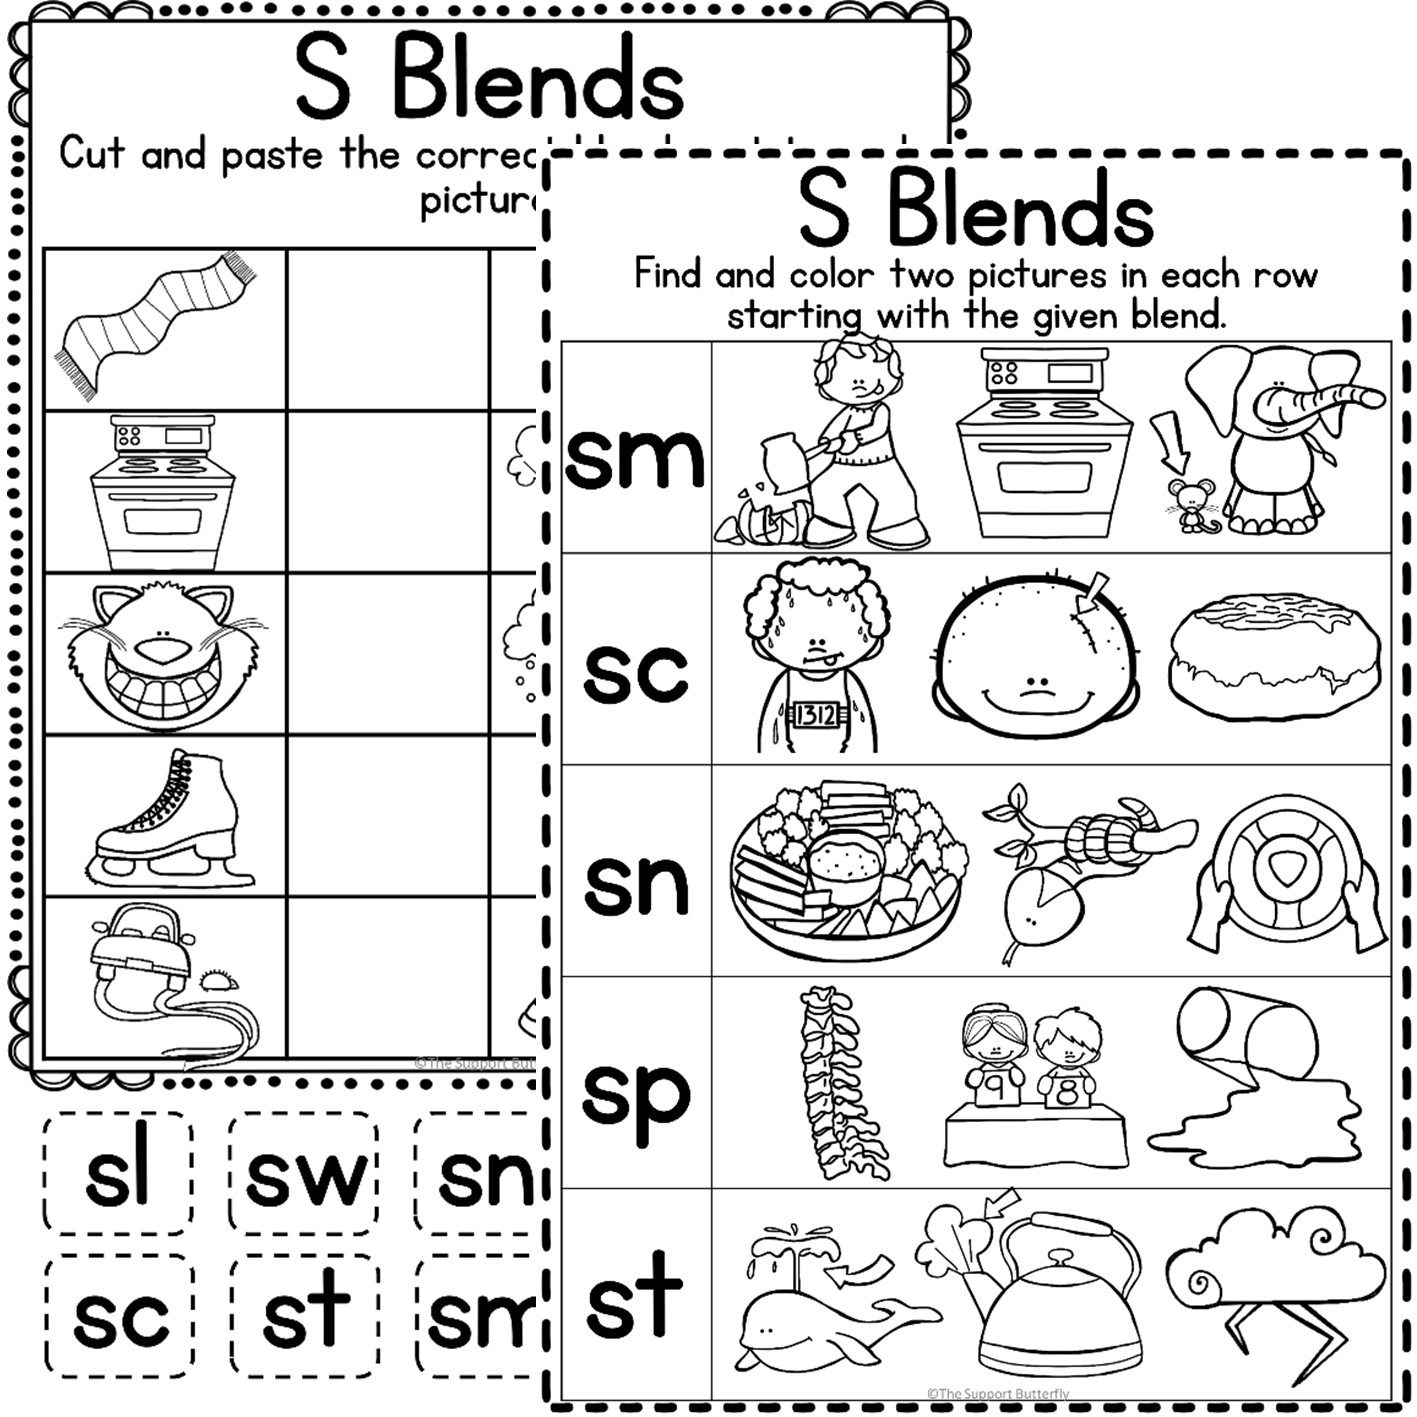 S blends activities and worksheets made by teachers